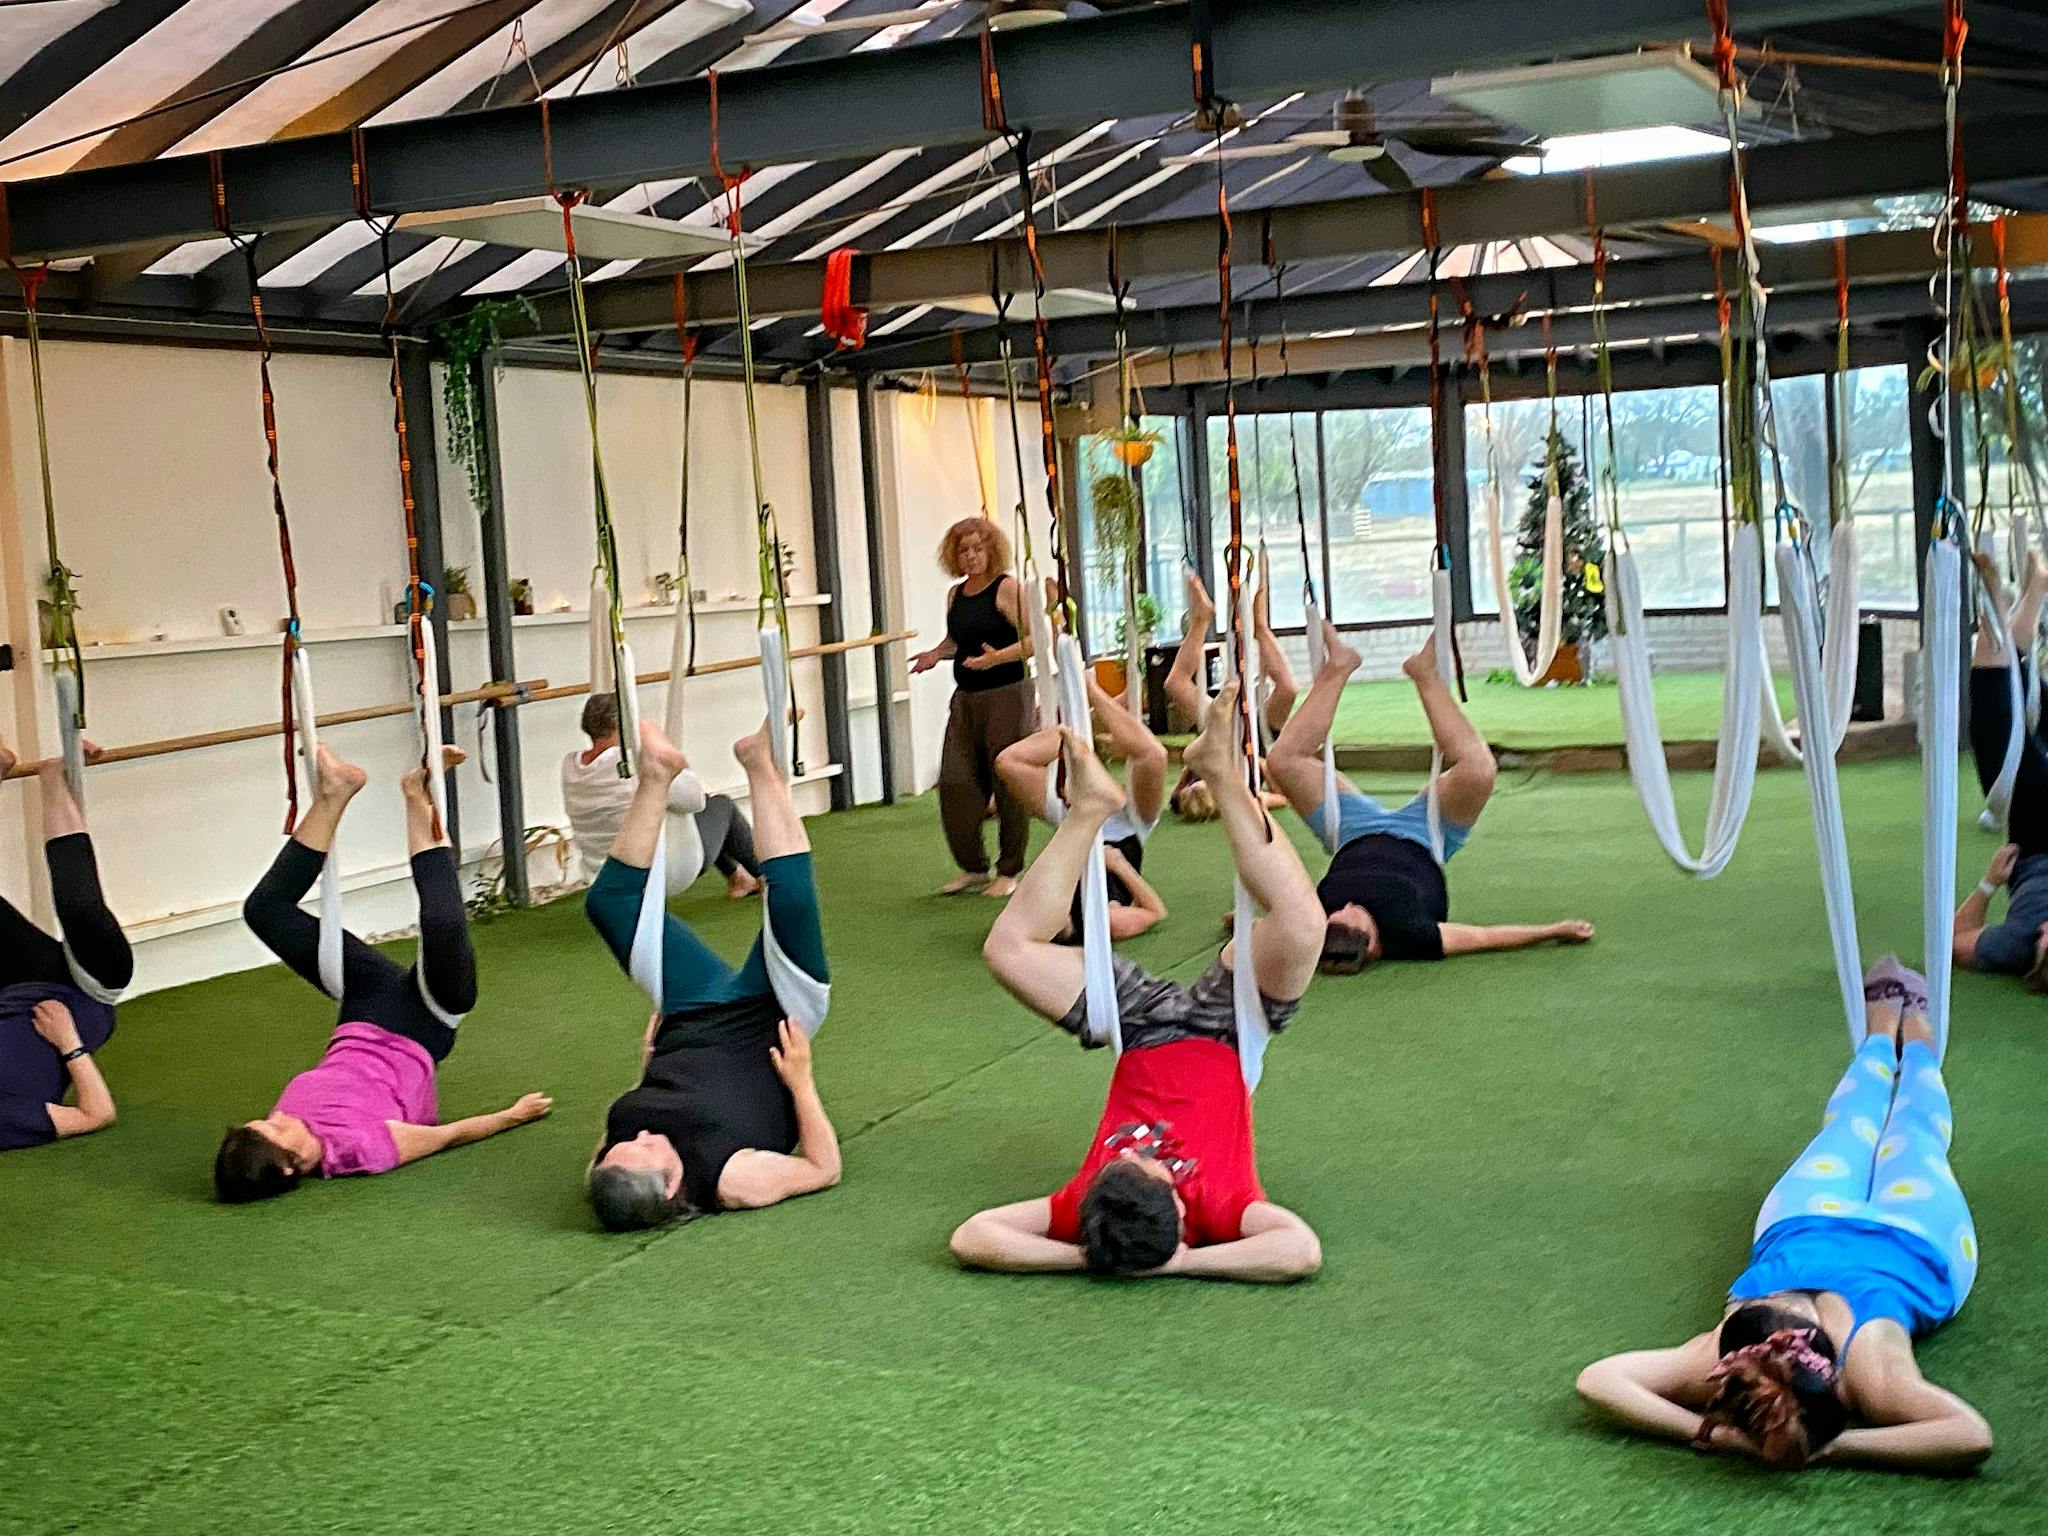 People hanging from aerial yoga silks low to the ground